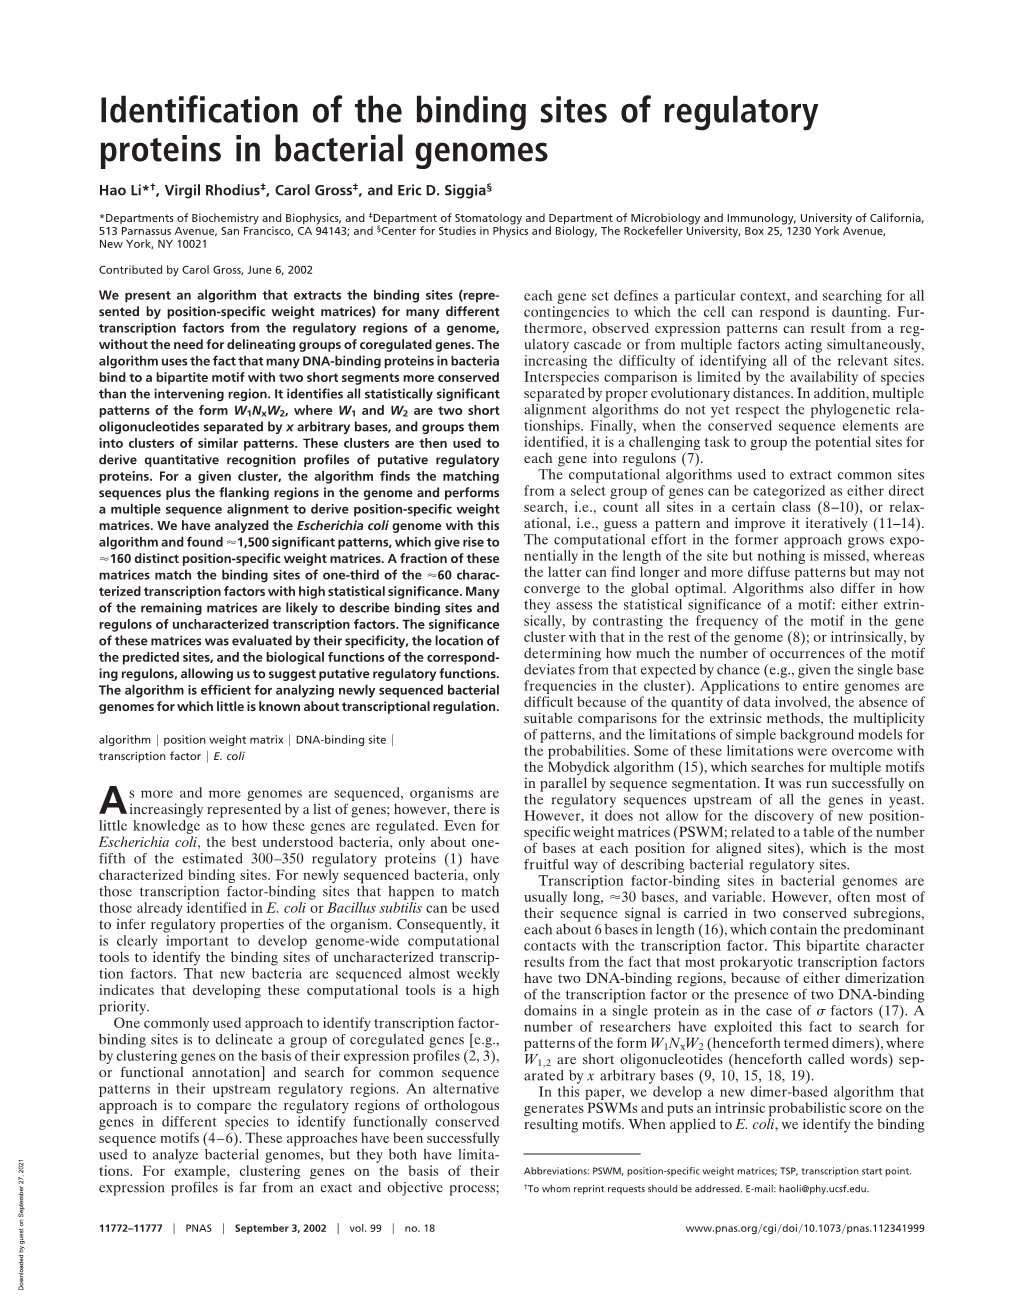 Identification of the Binding Sites of Regulatory Proteins in Bacterial Genomes